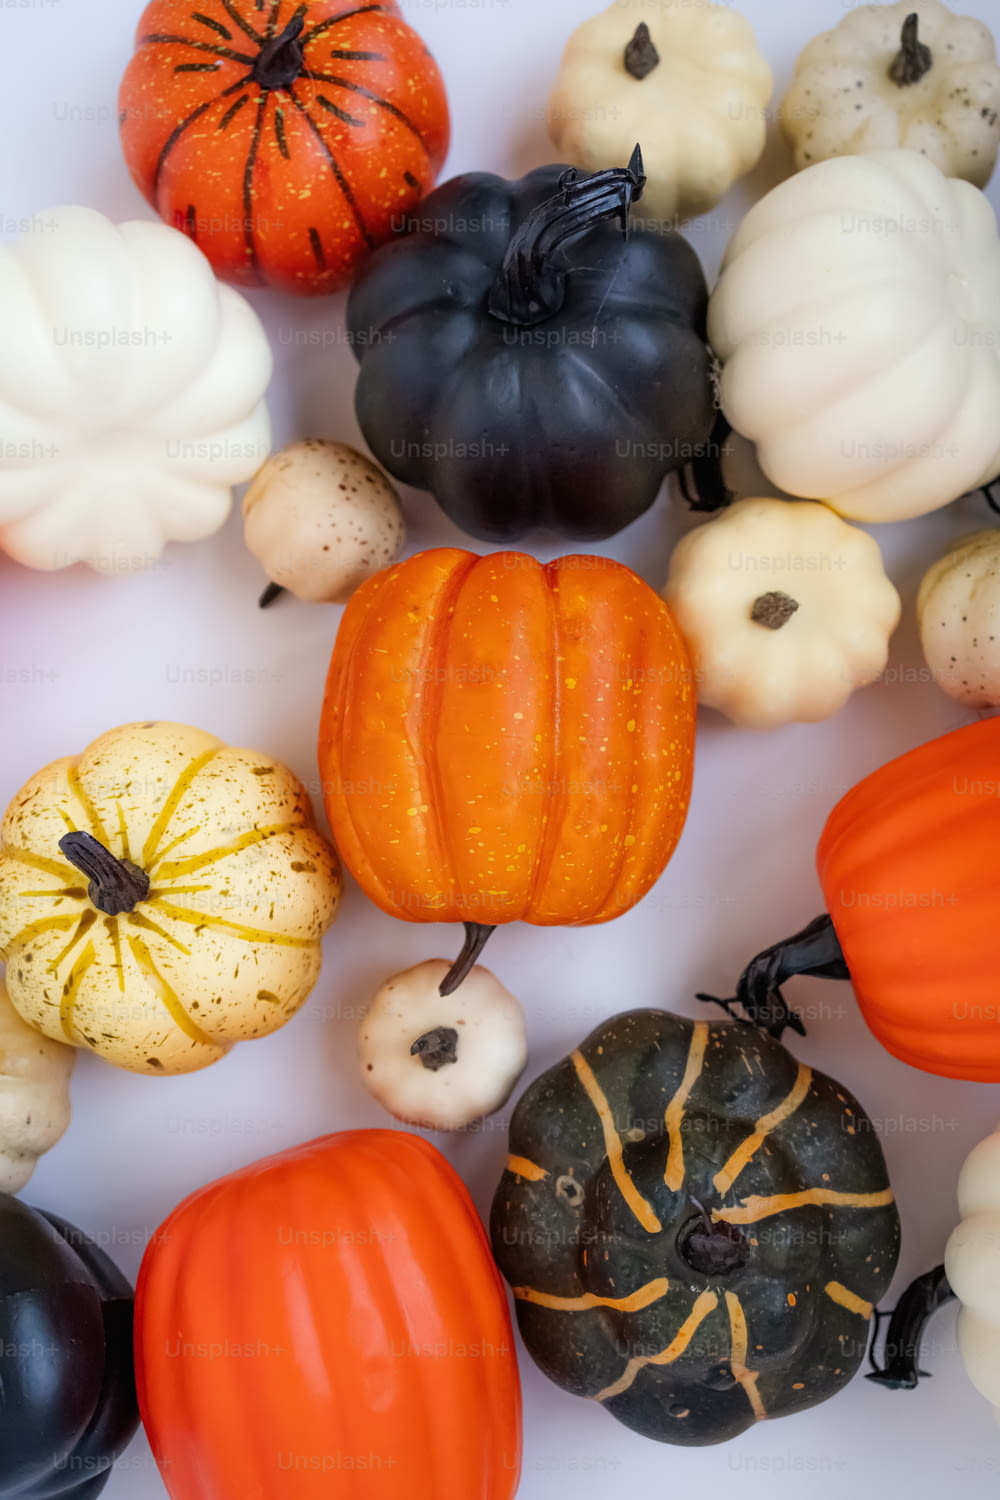 a group of pumpkins and gourds on a white surface